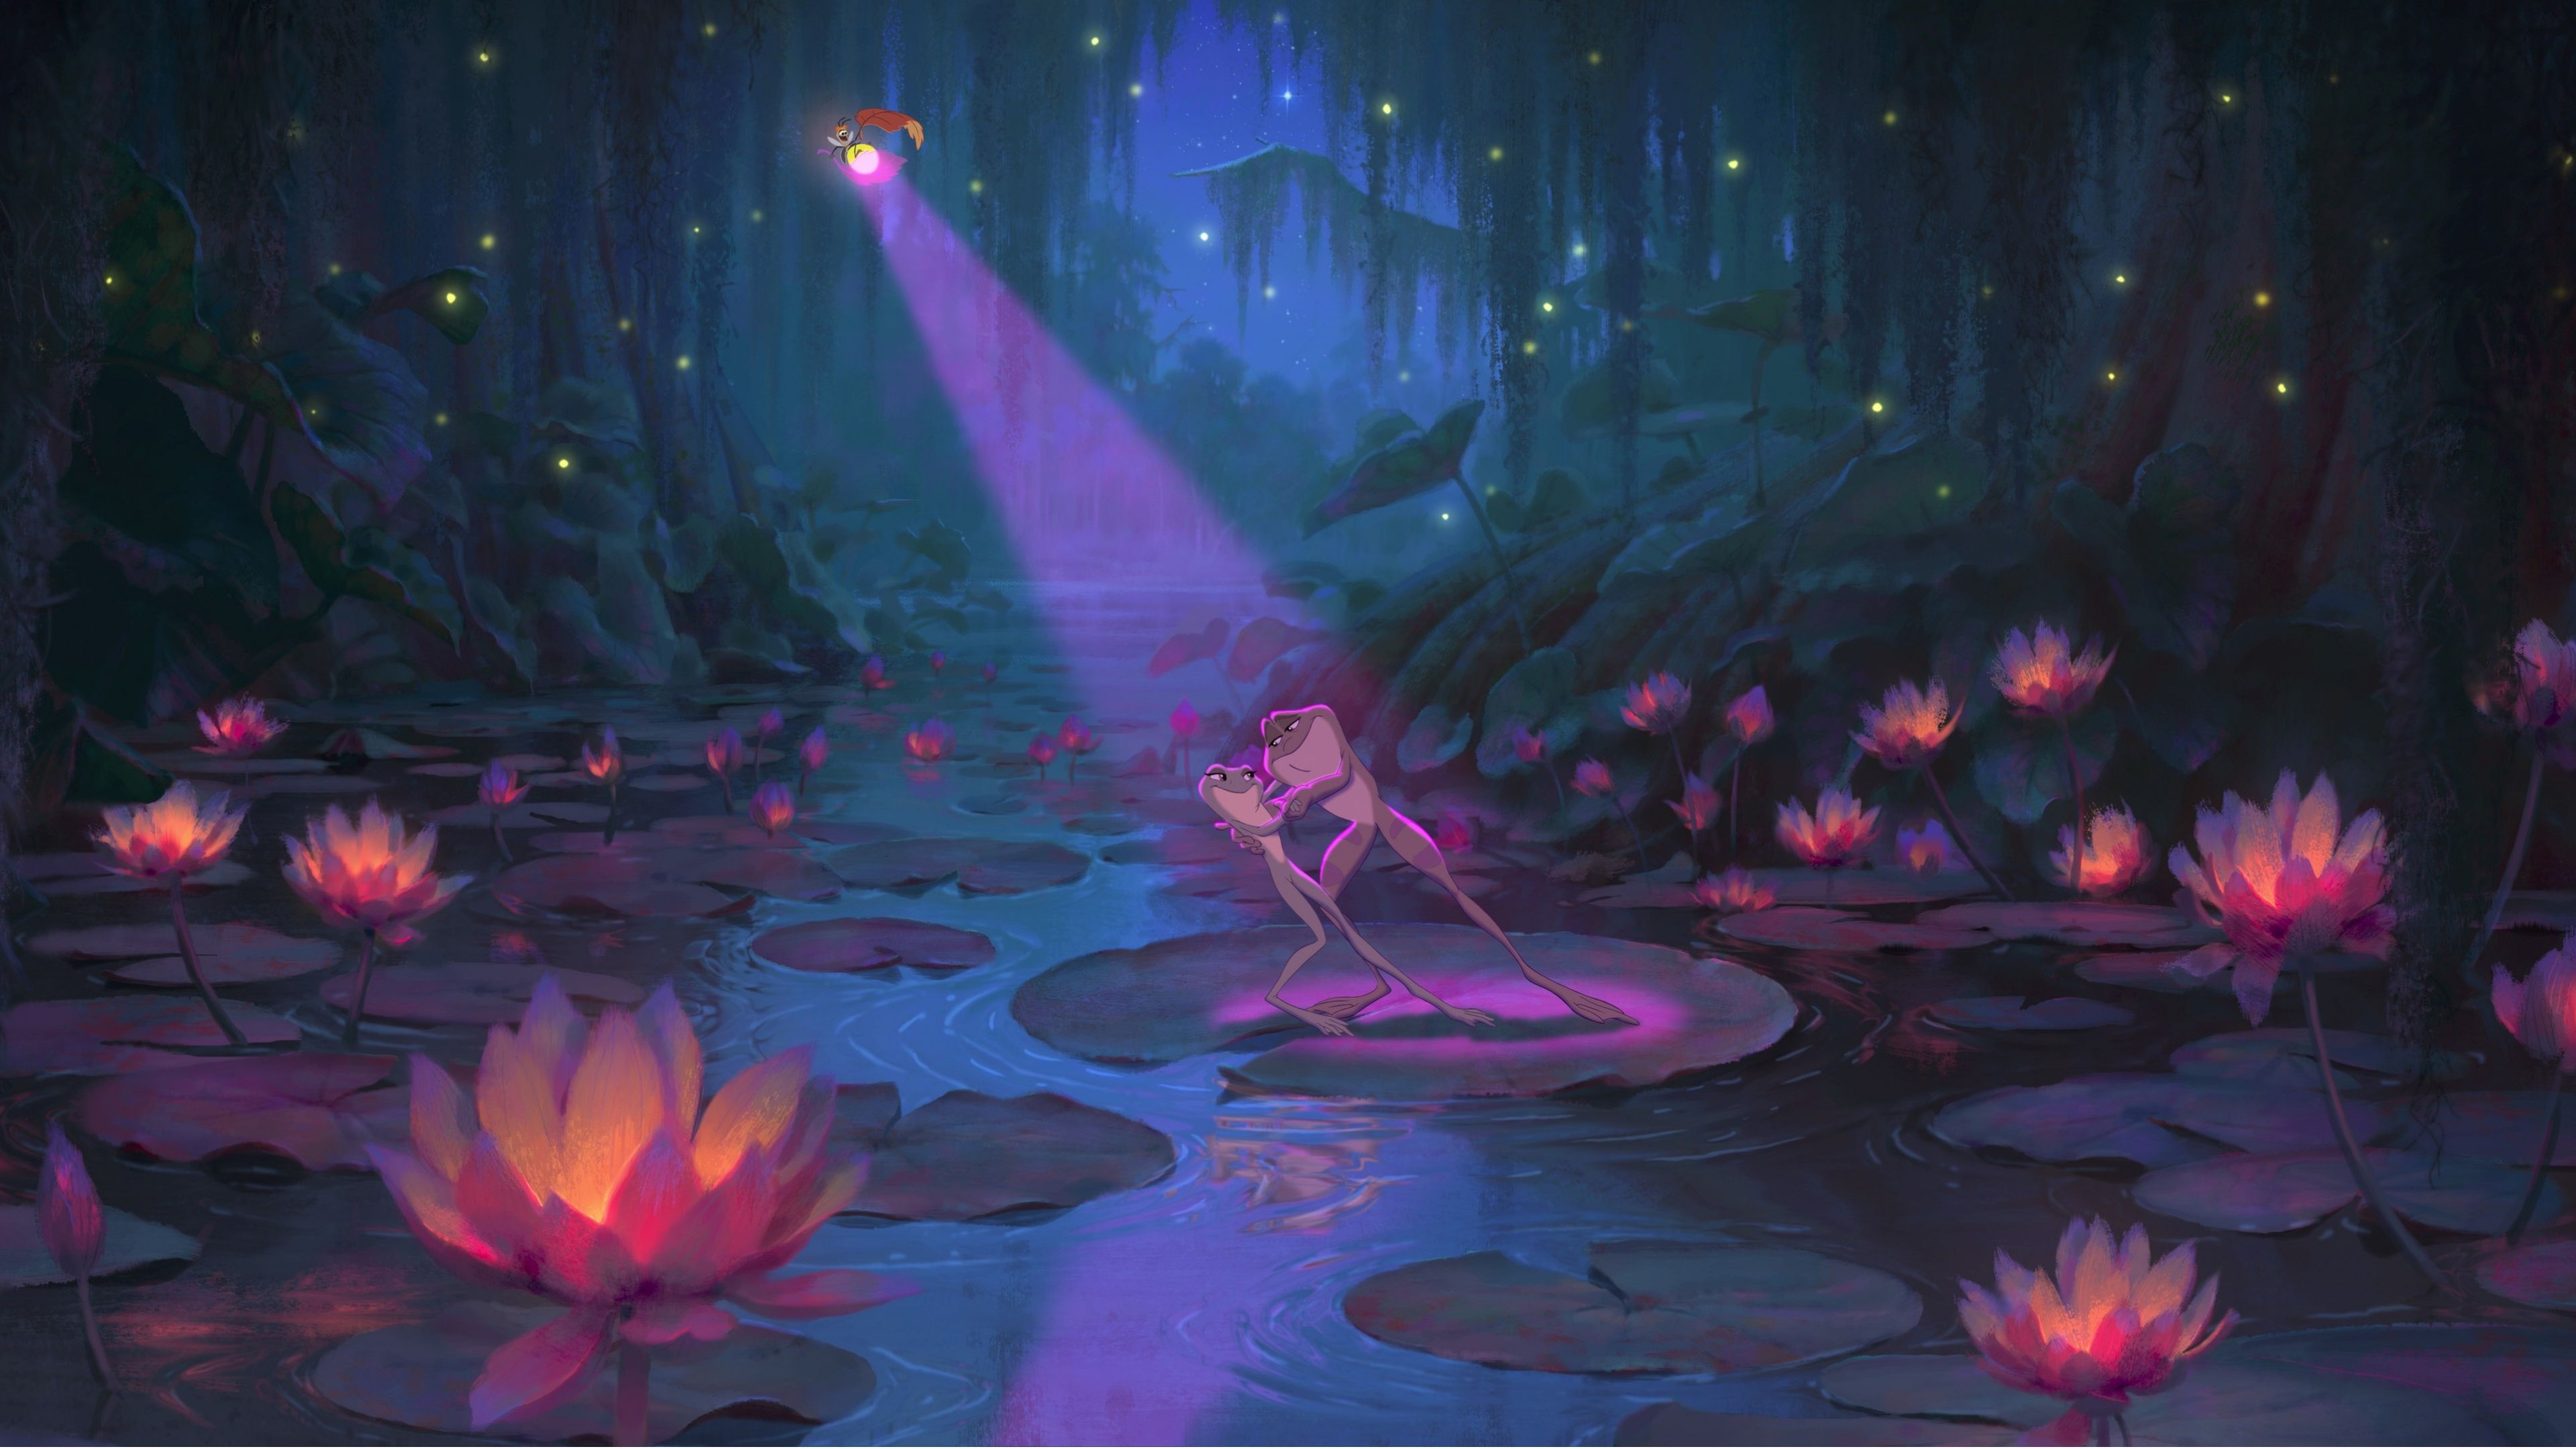 Download Wallpaper 3840x2160 The princess and the frog, Frog ...